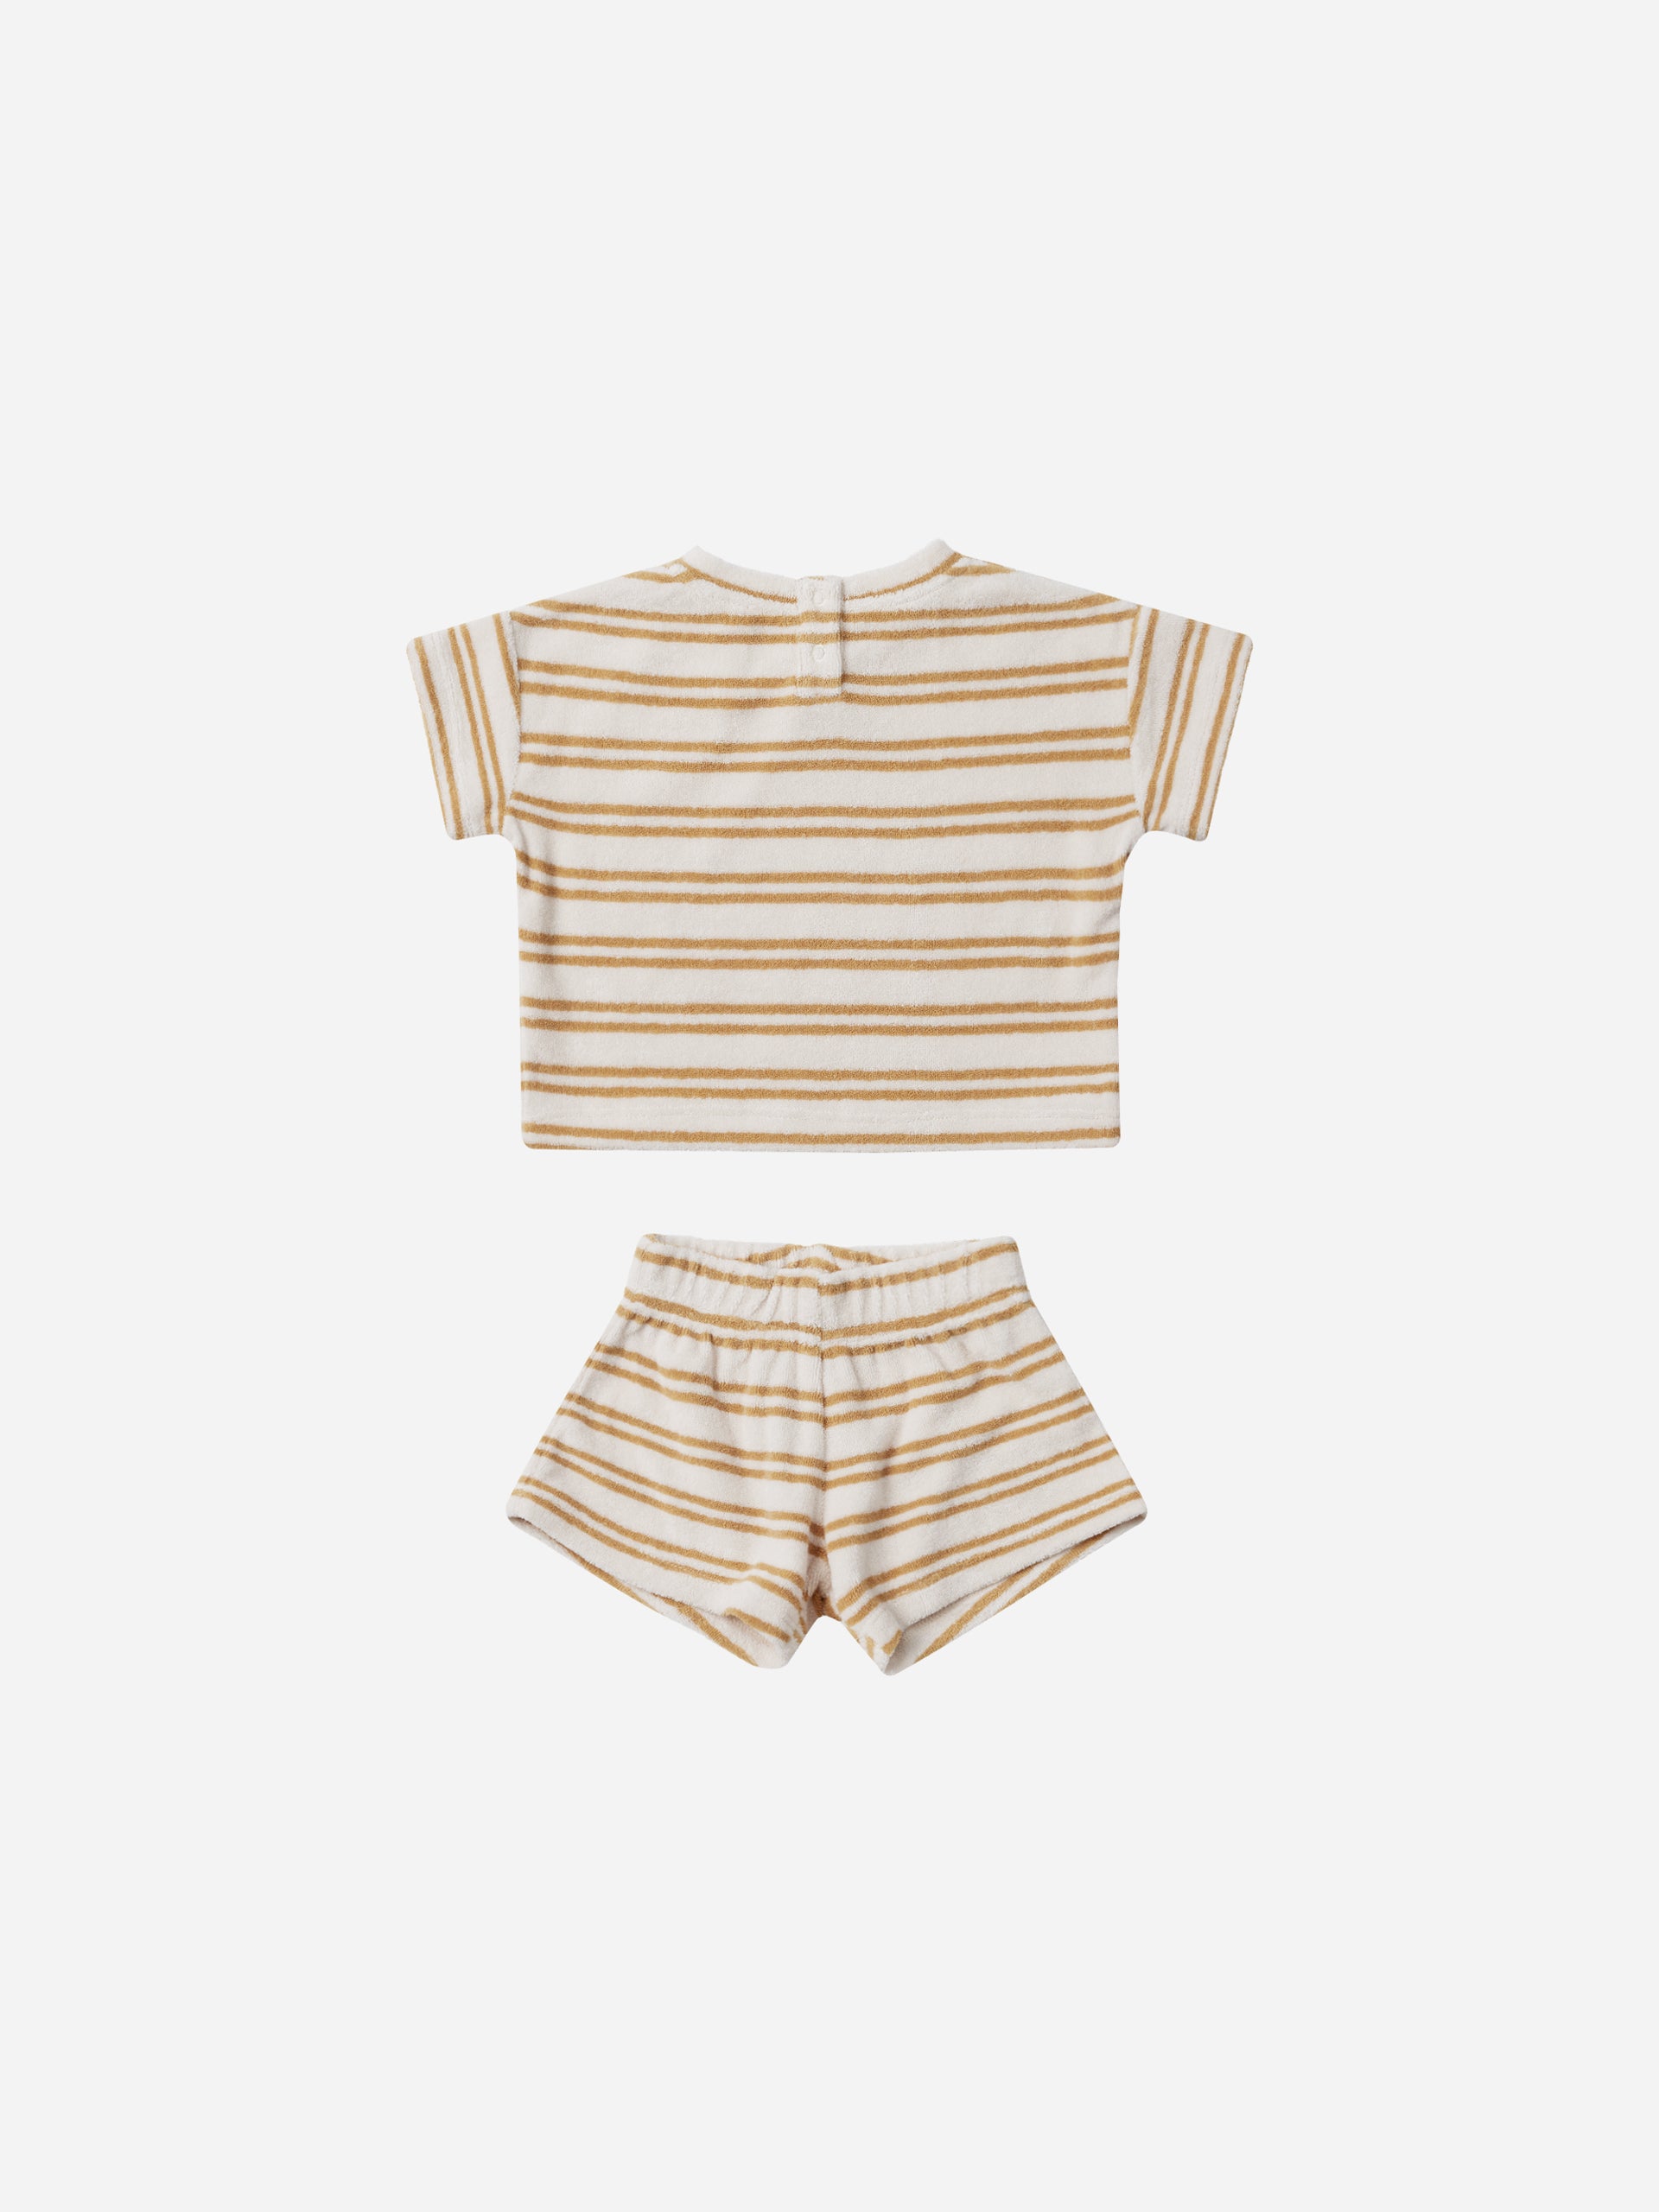 Terry Tee + Shorts Set || Honey Stripe - Rylee + Cru | Kids Clothes | Trendy Baby Clothes | Modern Infant Outfits |